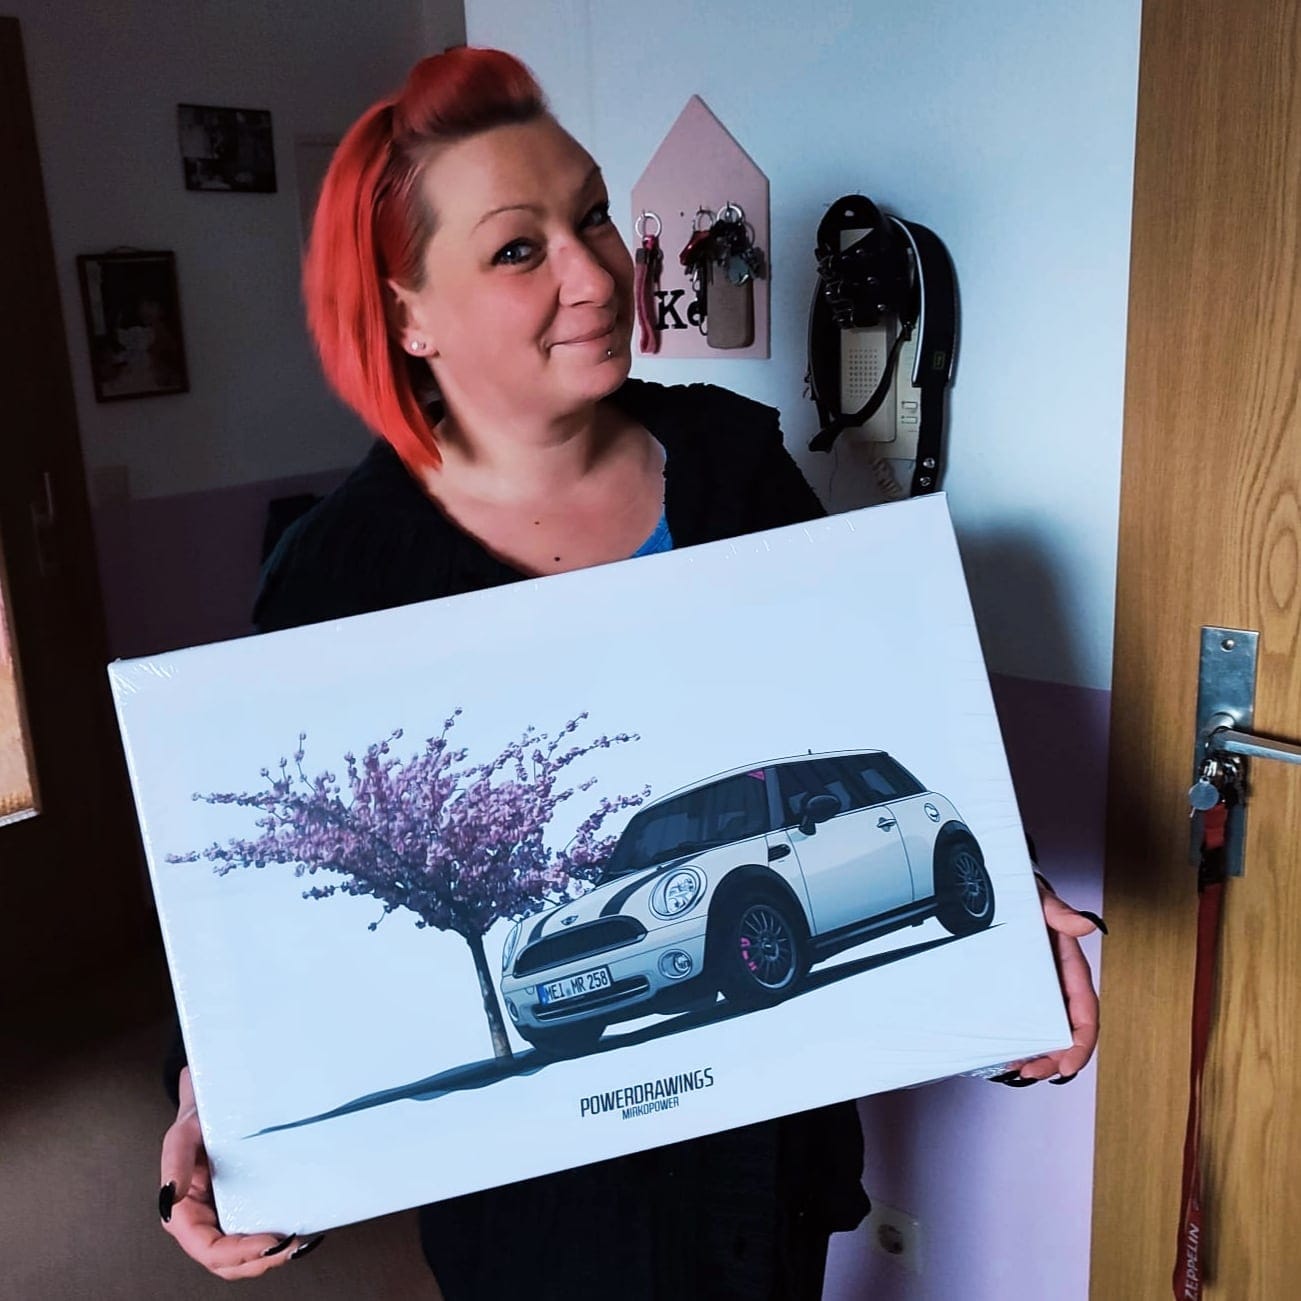 POWERDRAWINGS - Your Car as a drawing